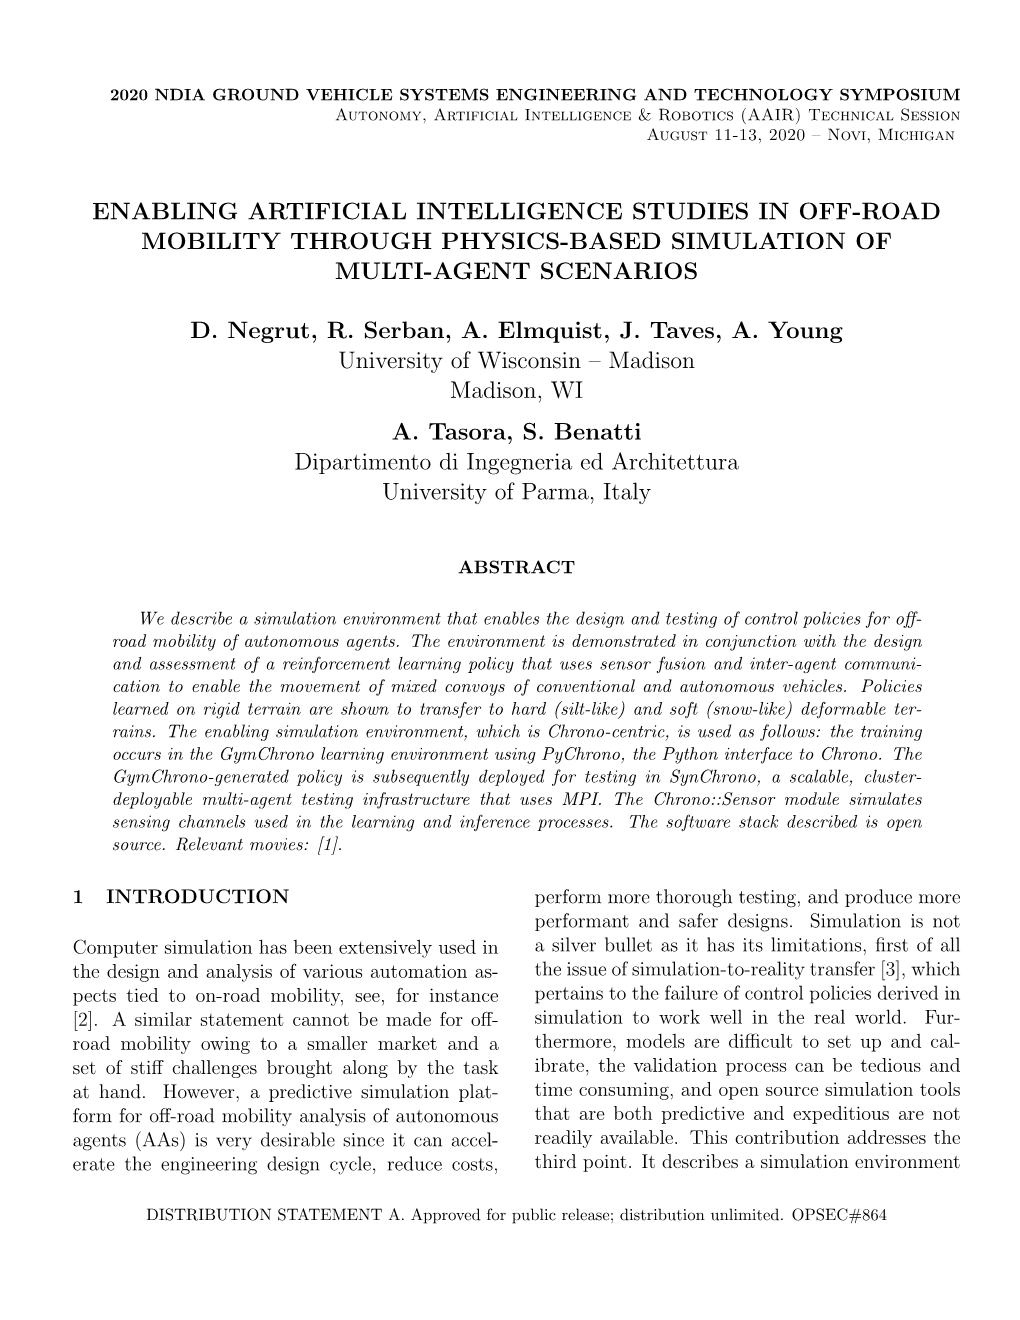 Enabling Artificial Intelligence Studies in Off-Road Mobility Through Physics-Based Simulation of Multi-Agent Scenarios